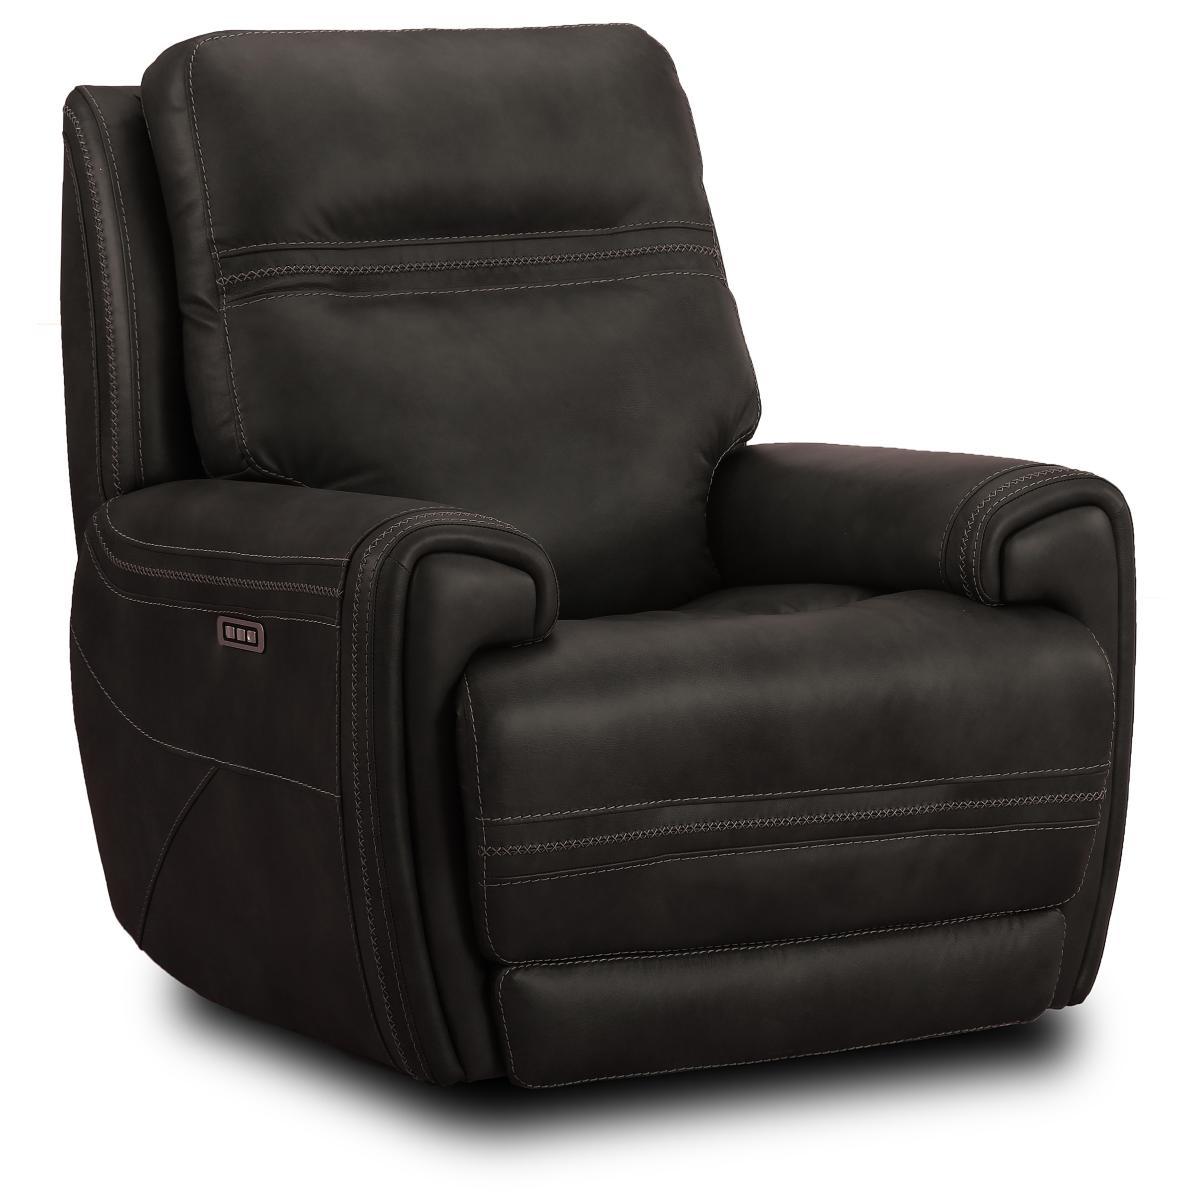 Dark Leather Power Recliner with Cup Holders